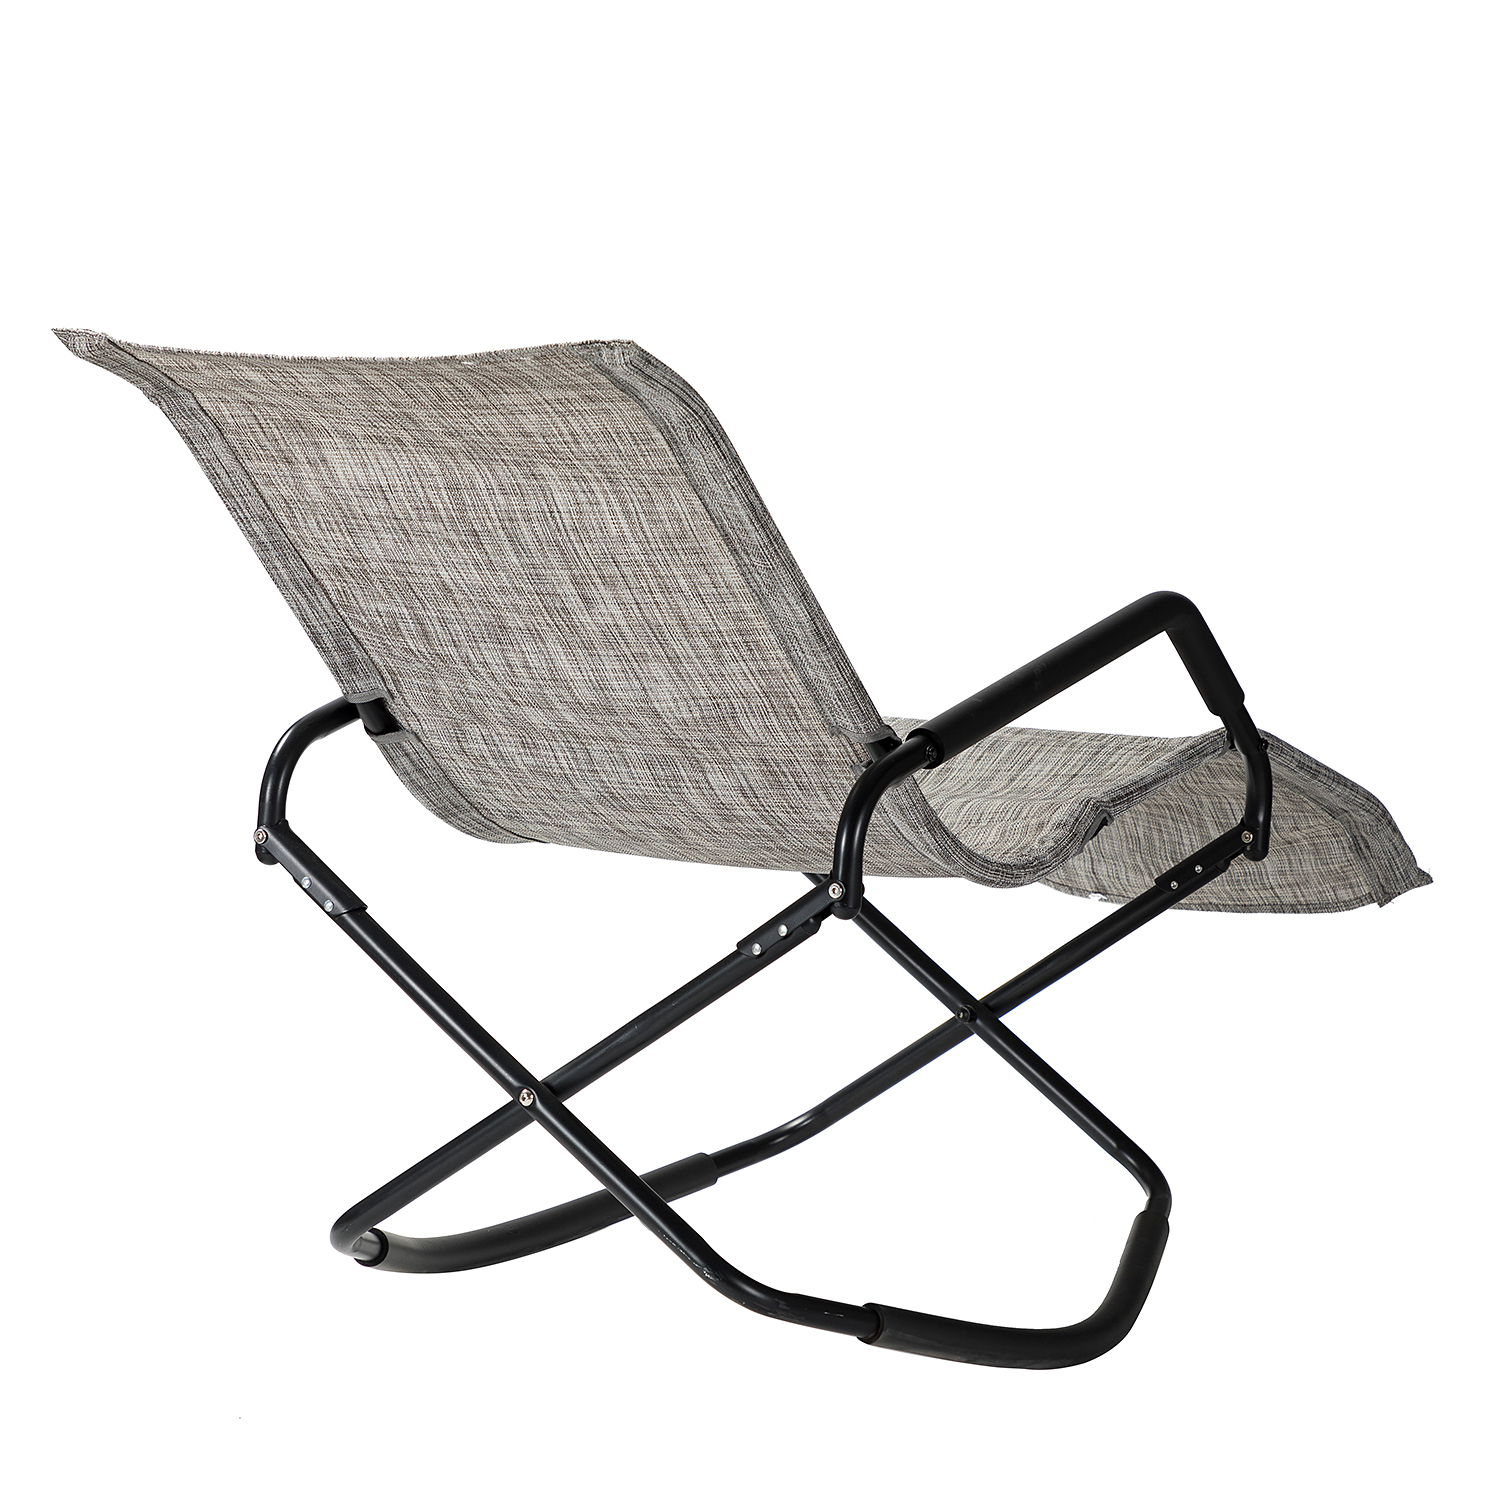 Folding Lounge Chair, Patio Rocking Chaise Chair with Armrests, Beach Lightweight Reclining Chair, Outdoor Portable Folding Chair, Lounge Chaise Chair for Camping, Pool, Lawn, Garden, D7843 - image 3 of 10